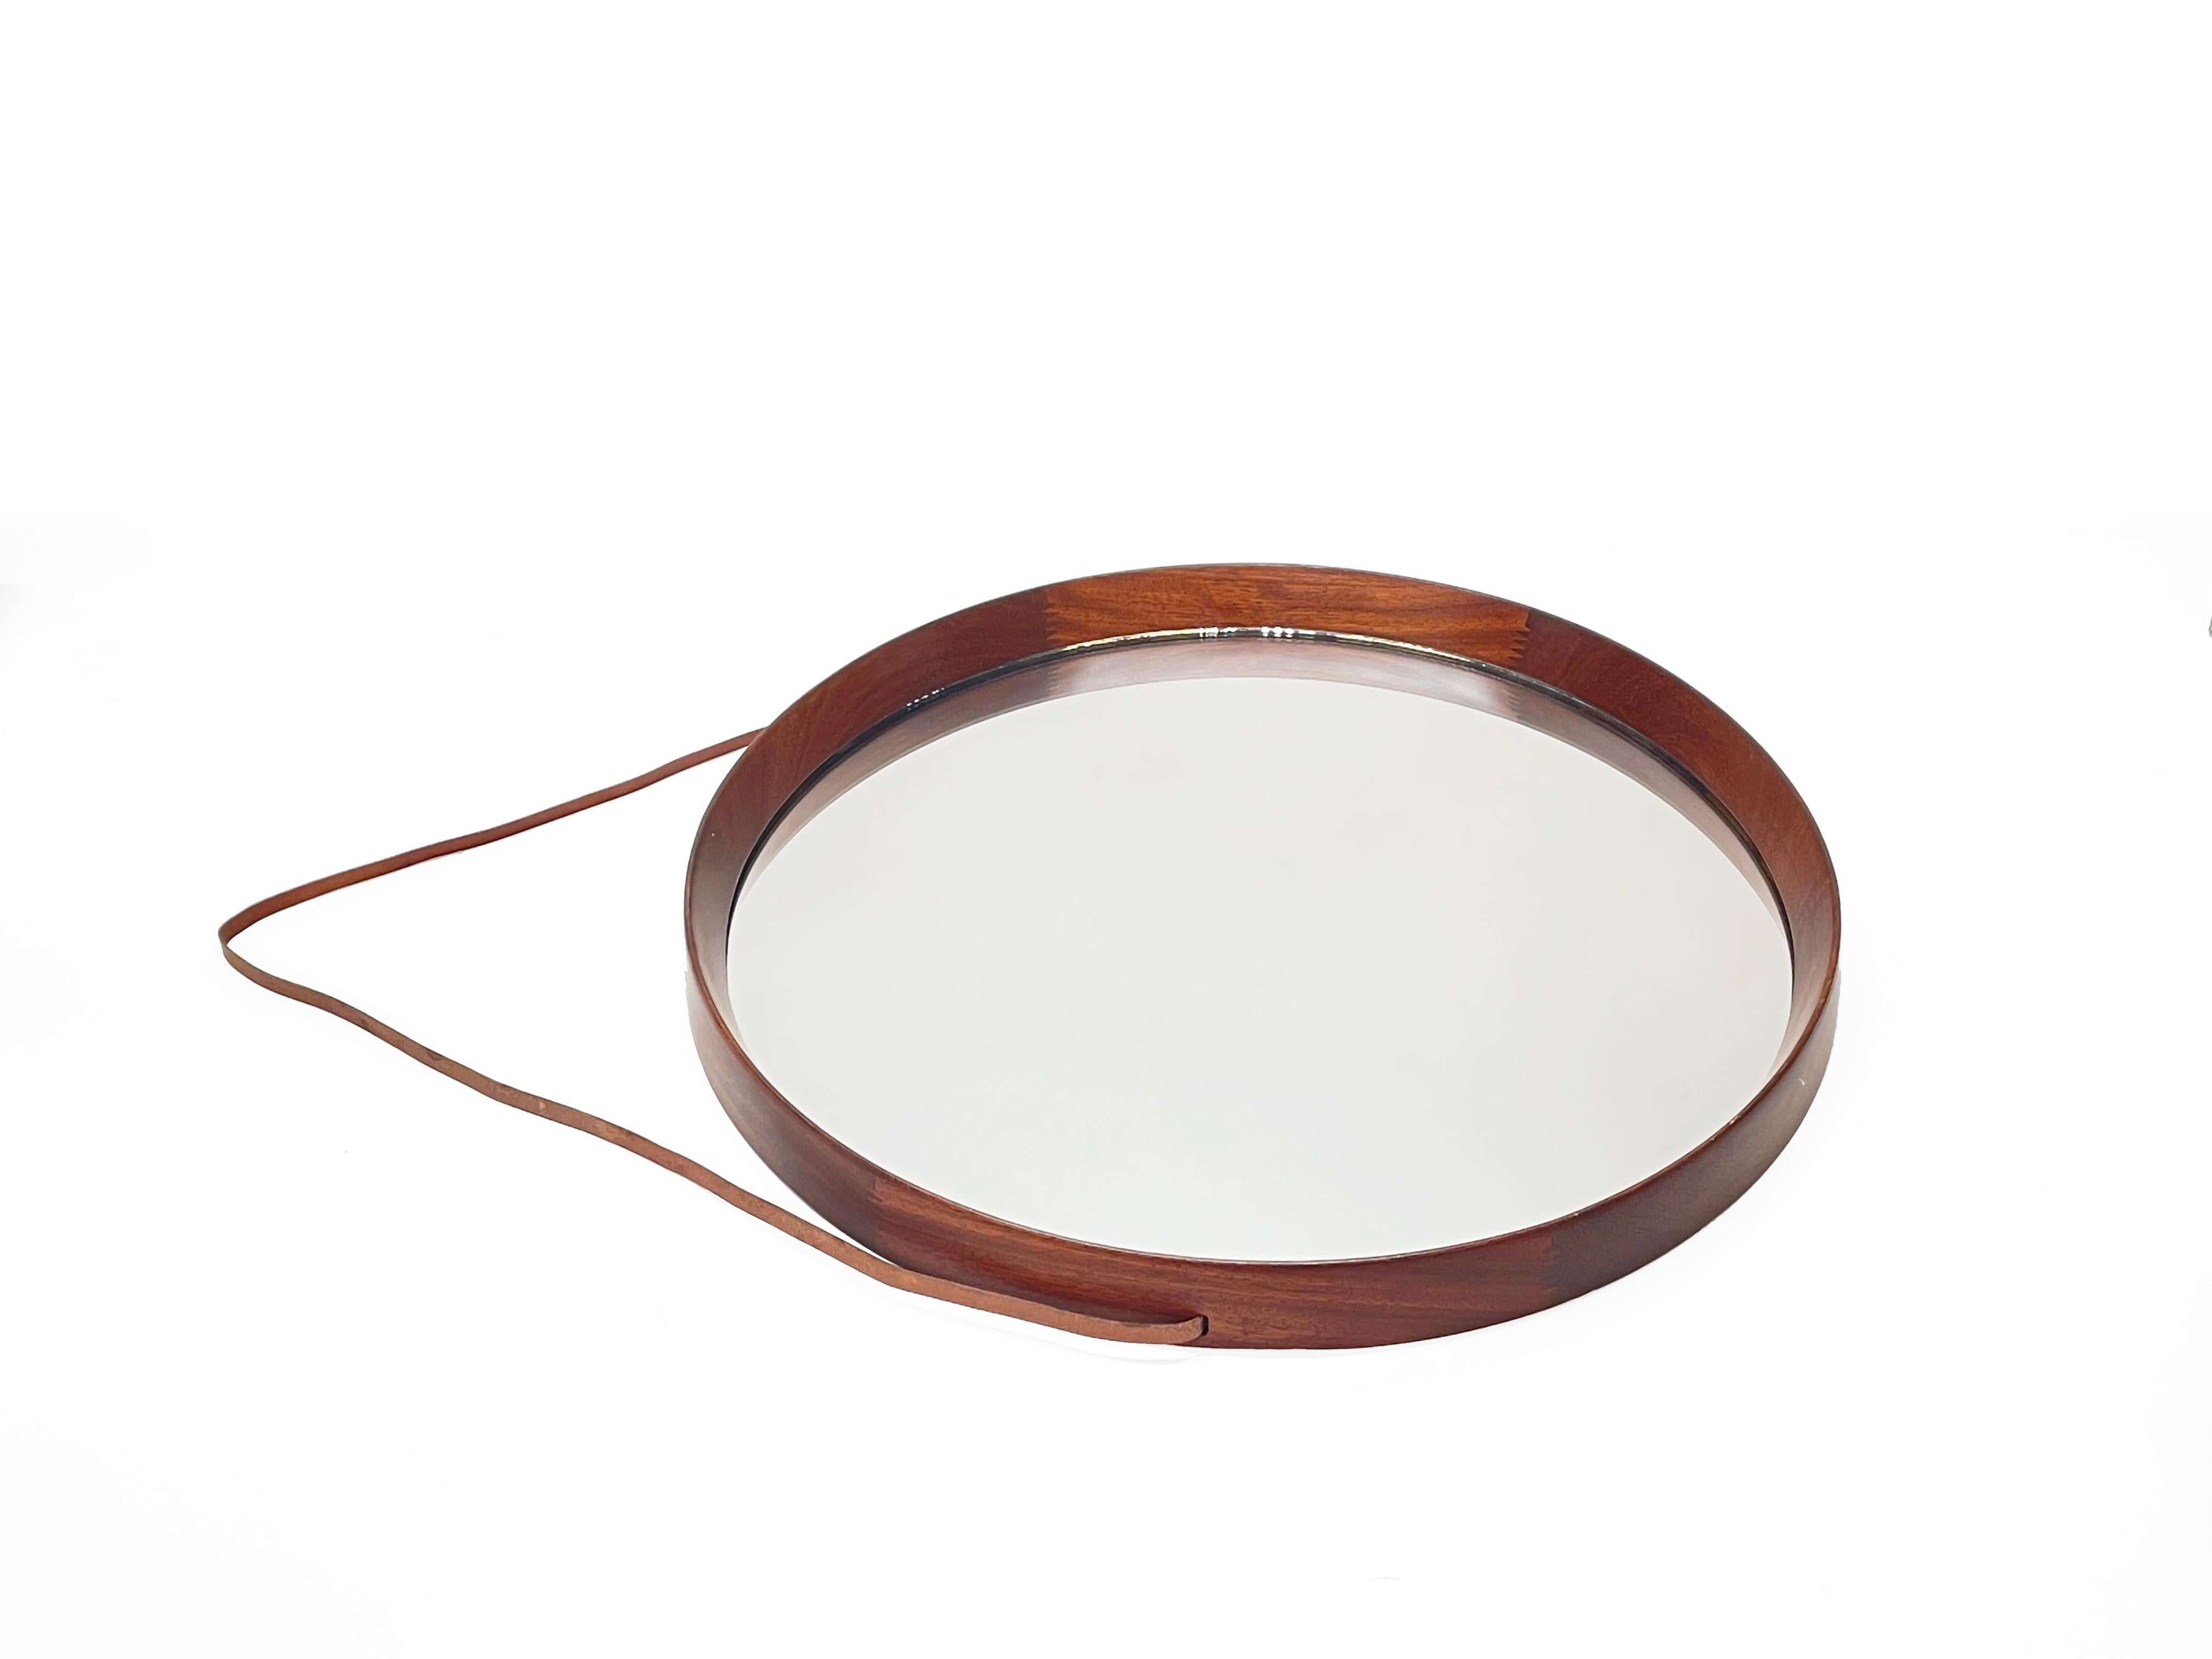 Mid-Century Modern Uno & Östen Kristiansson Wood and Leather Swedish Wall Mirror for Luxus, 1960s For Sale